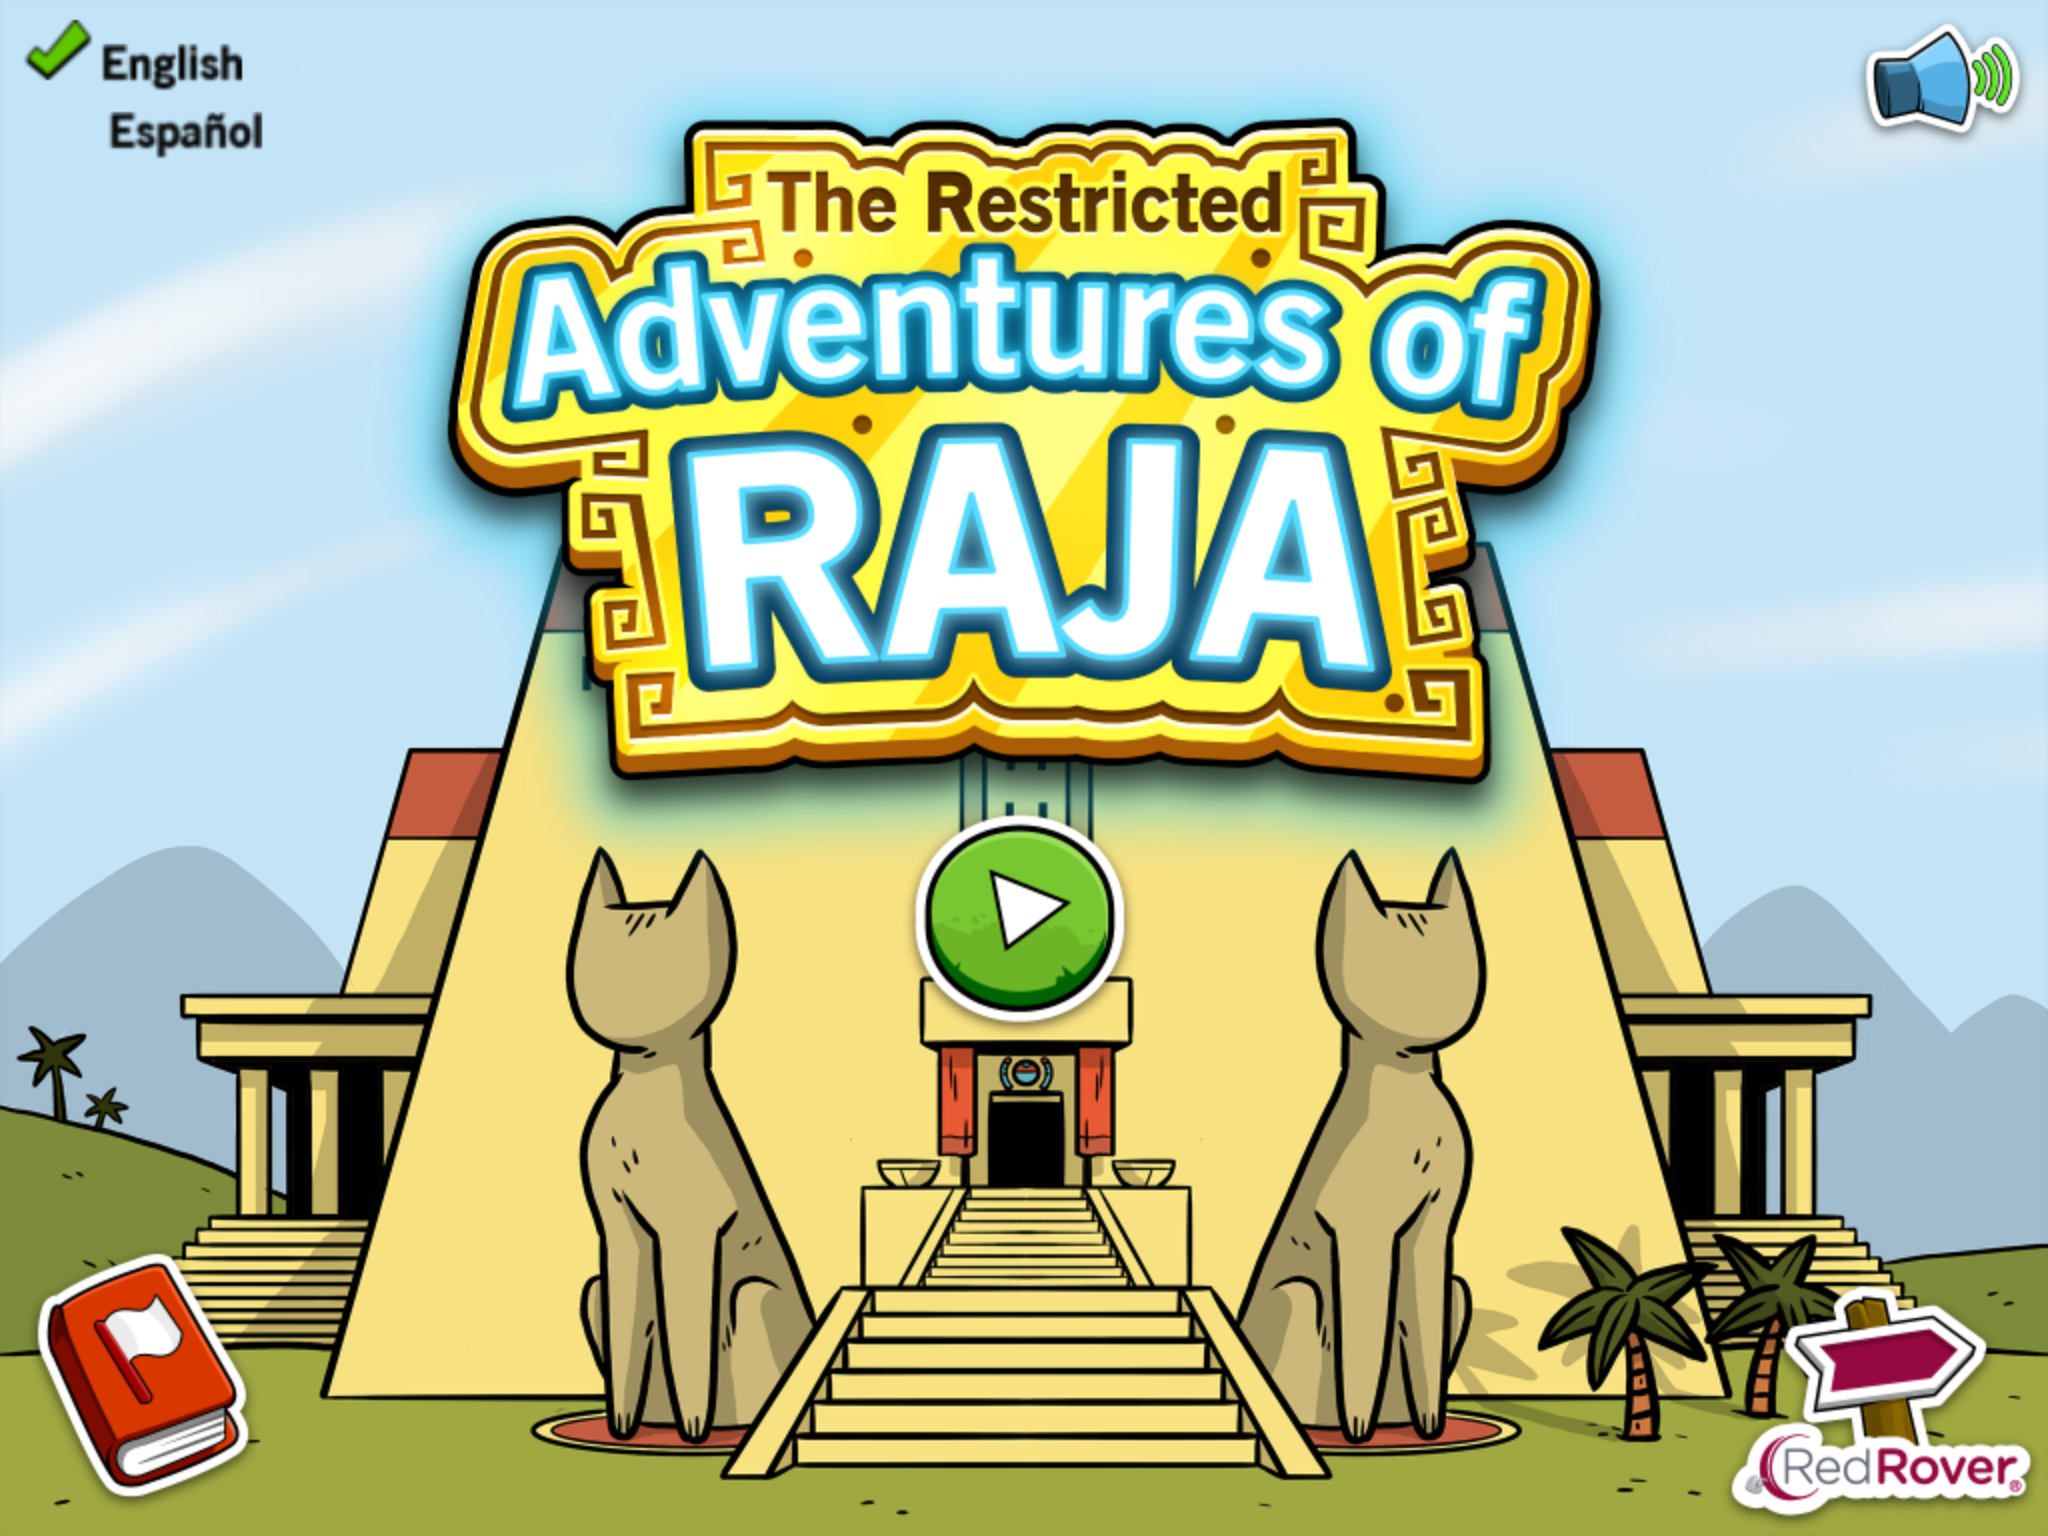 eBooks for Empathy - The Restricted Adventures of Raja